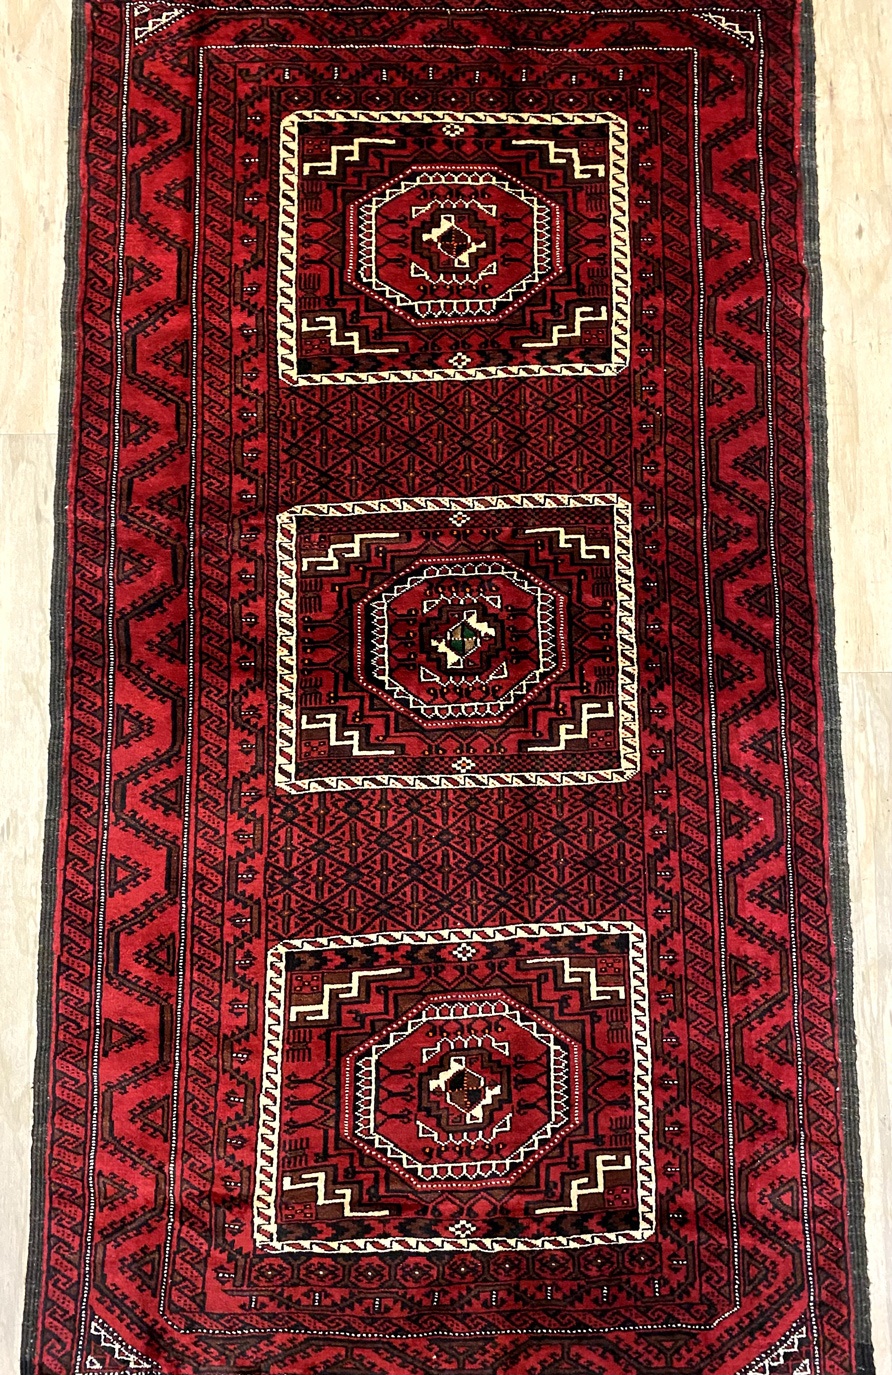 A Balouchi rug with intricate designs and beautiful colors, woven by Balouchi tribes in eastern Iran. The rug is a smaller size, making it a great choice for smaller rooms or areas.